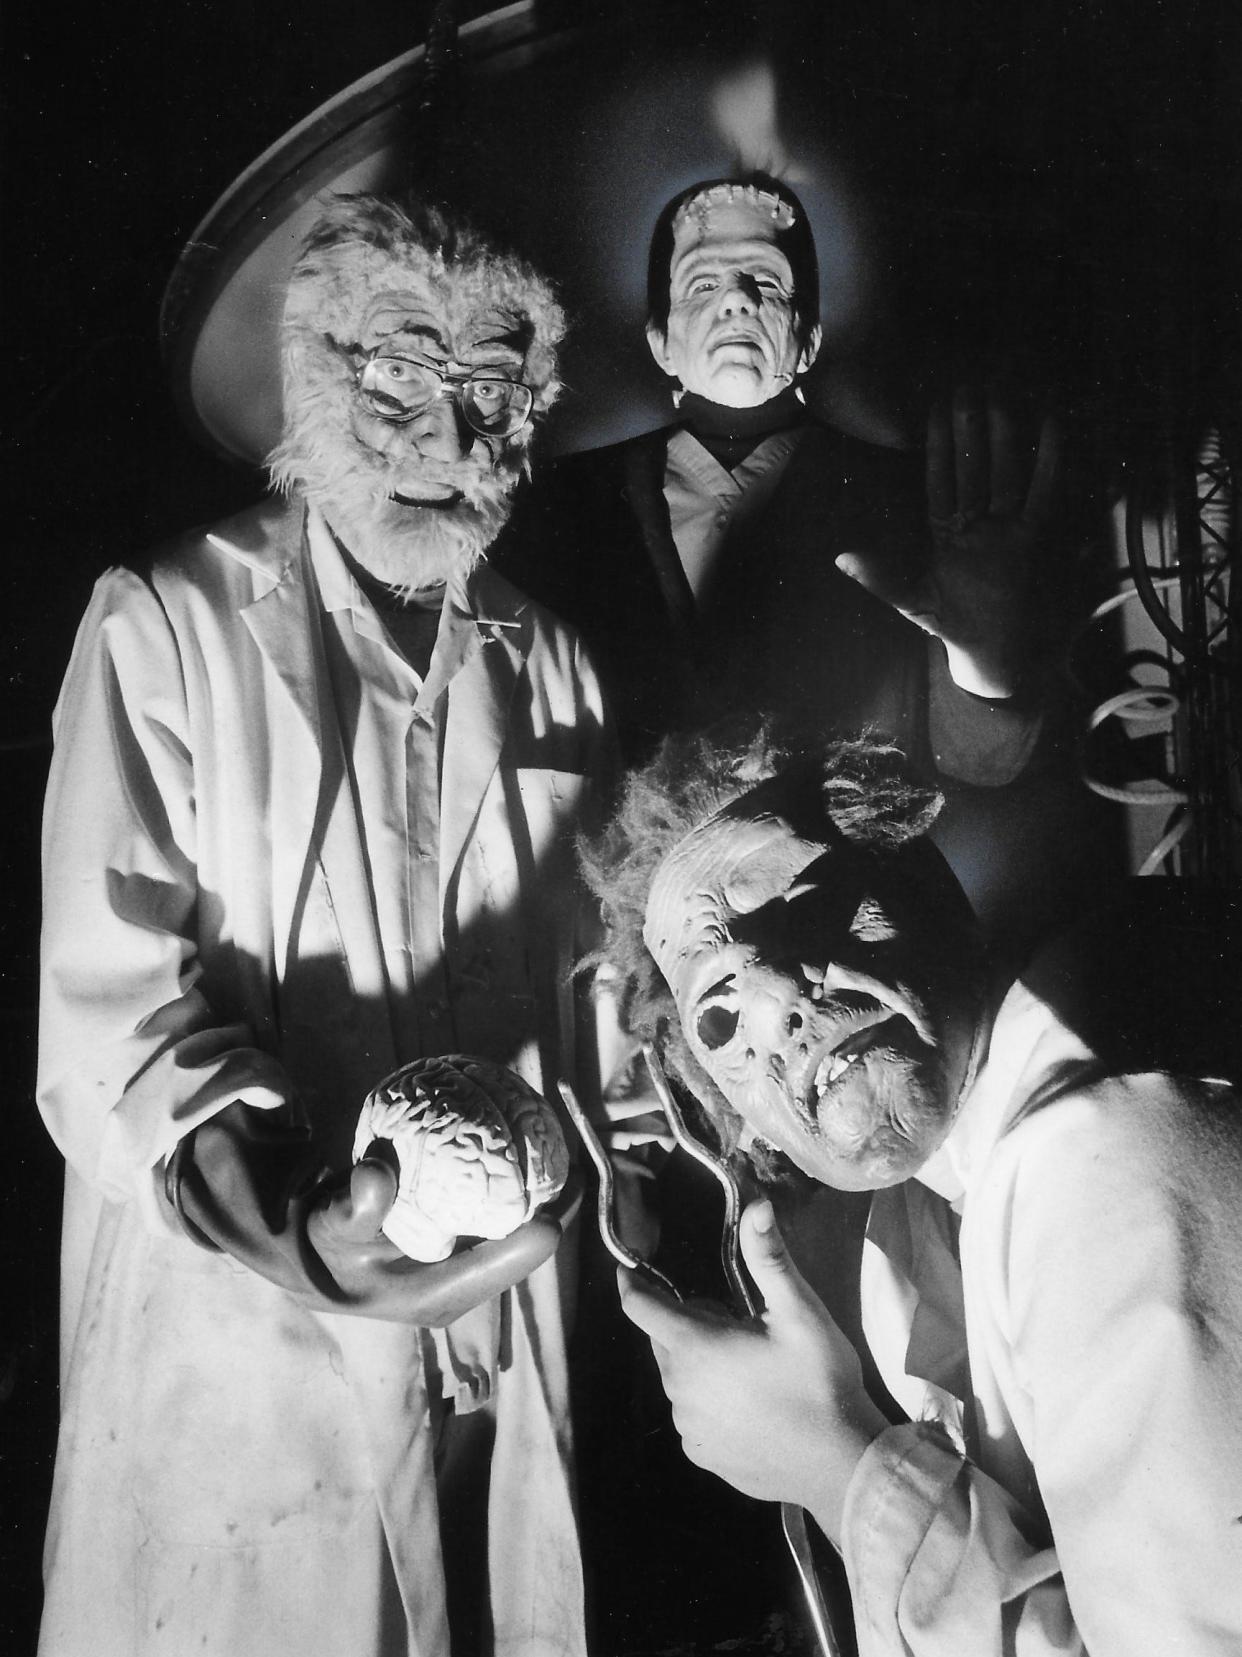 Dr. Frankenstein (Clinton Grant), Frankenstein's monster (Jeff Knight) and Igor (Kyle Hysell) await victims at the Haunted Schoolhouse in Akron on Oct. 9, 1980.